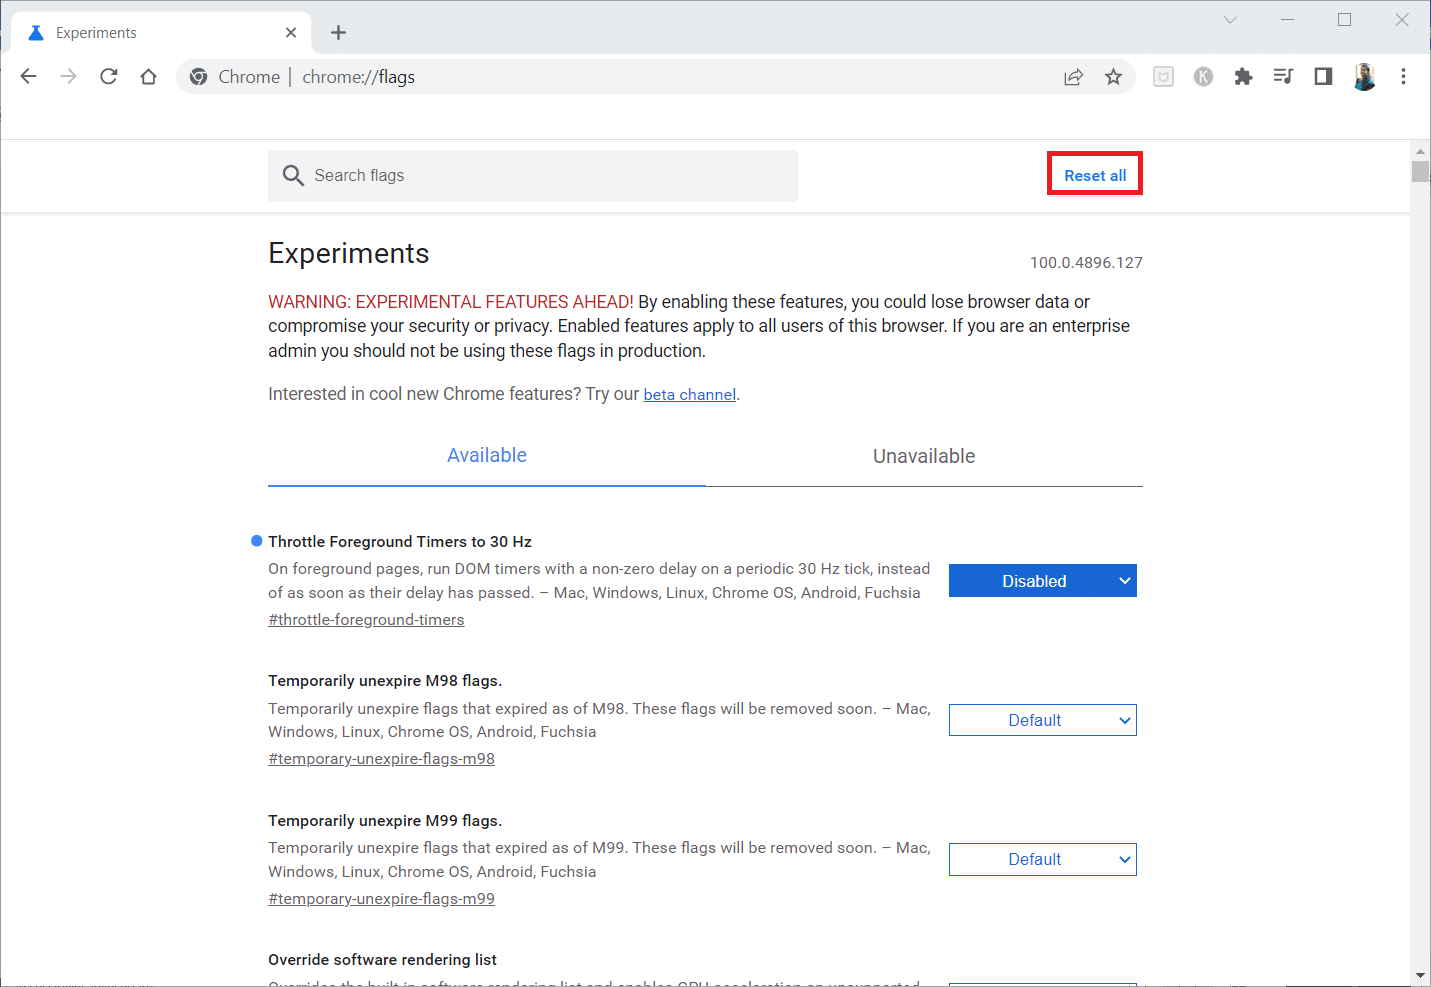 Click on the Reset all button to reset the experimental settings on Google Chrome